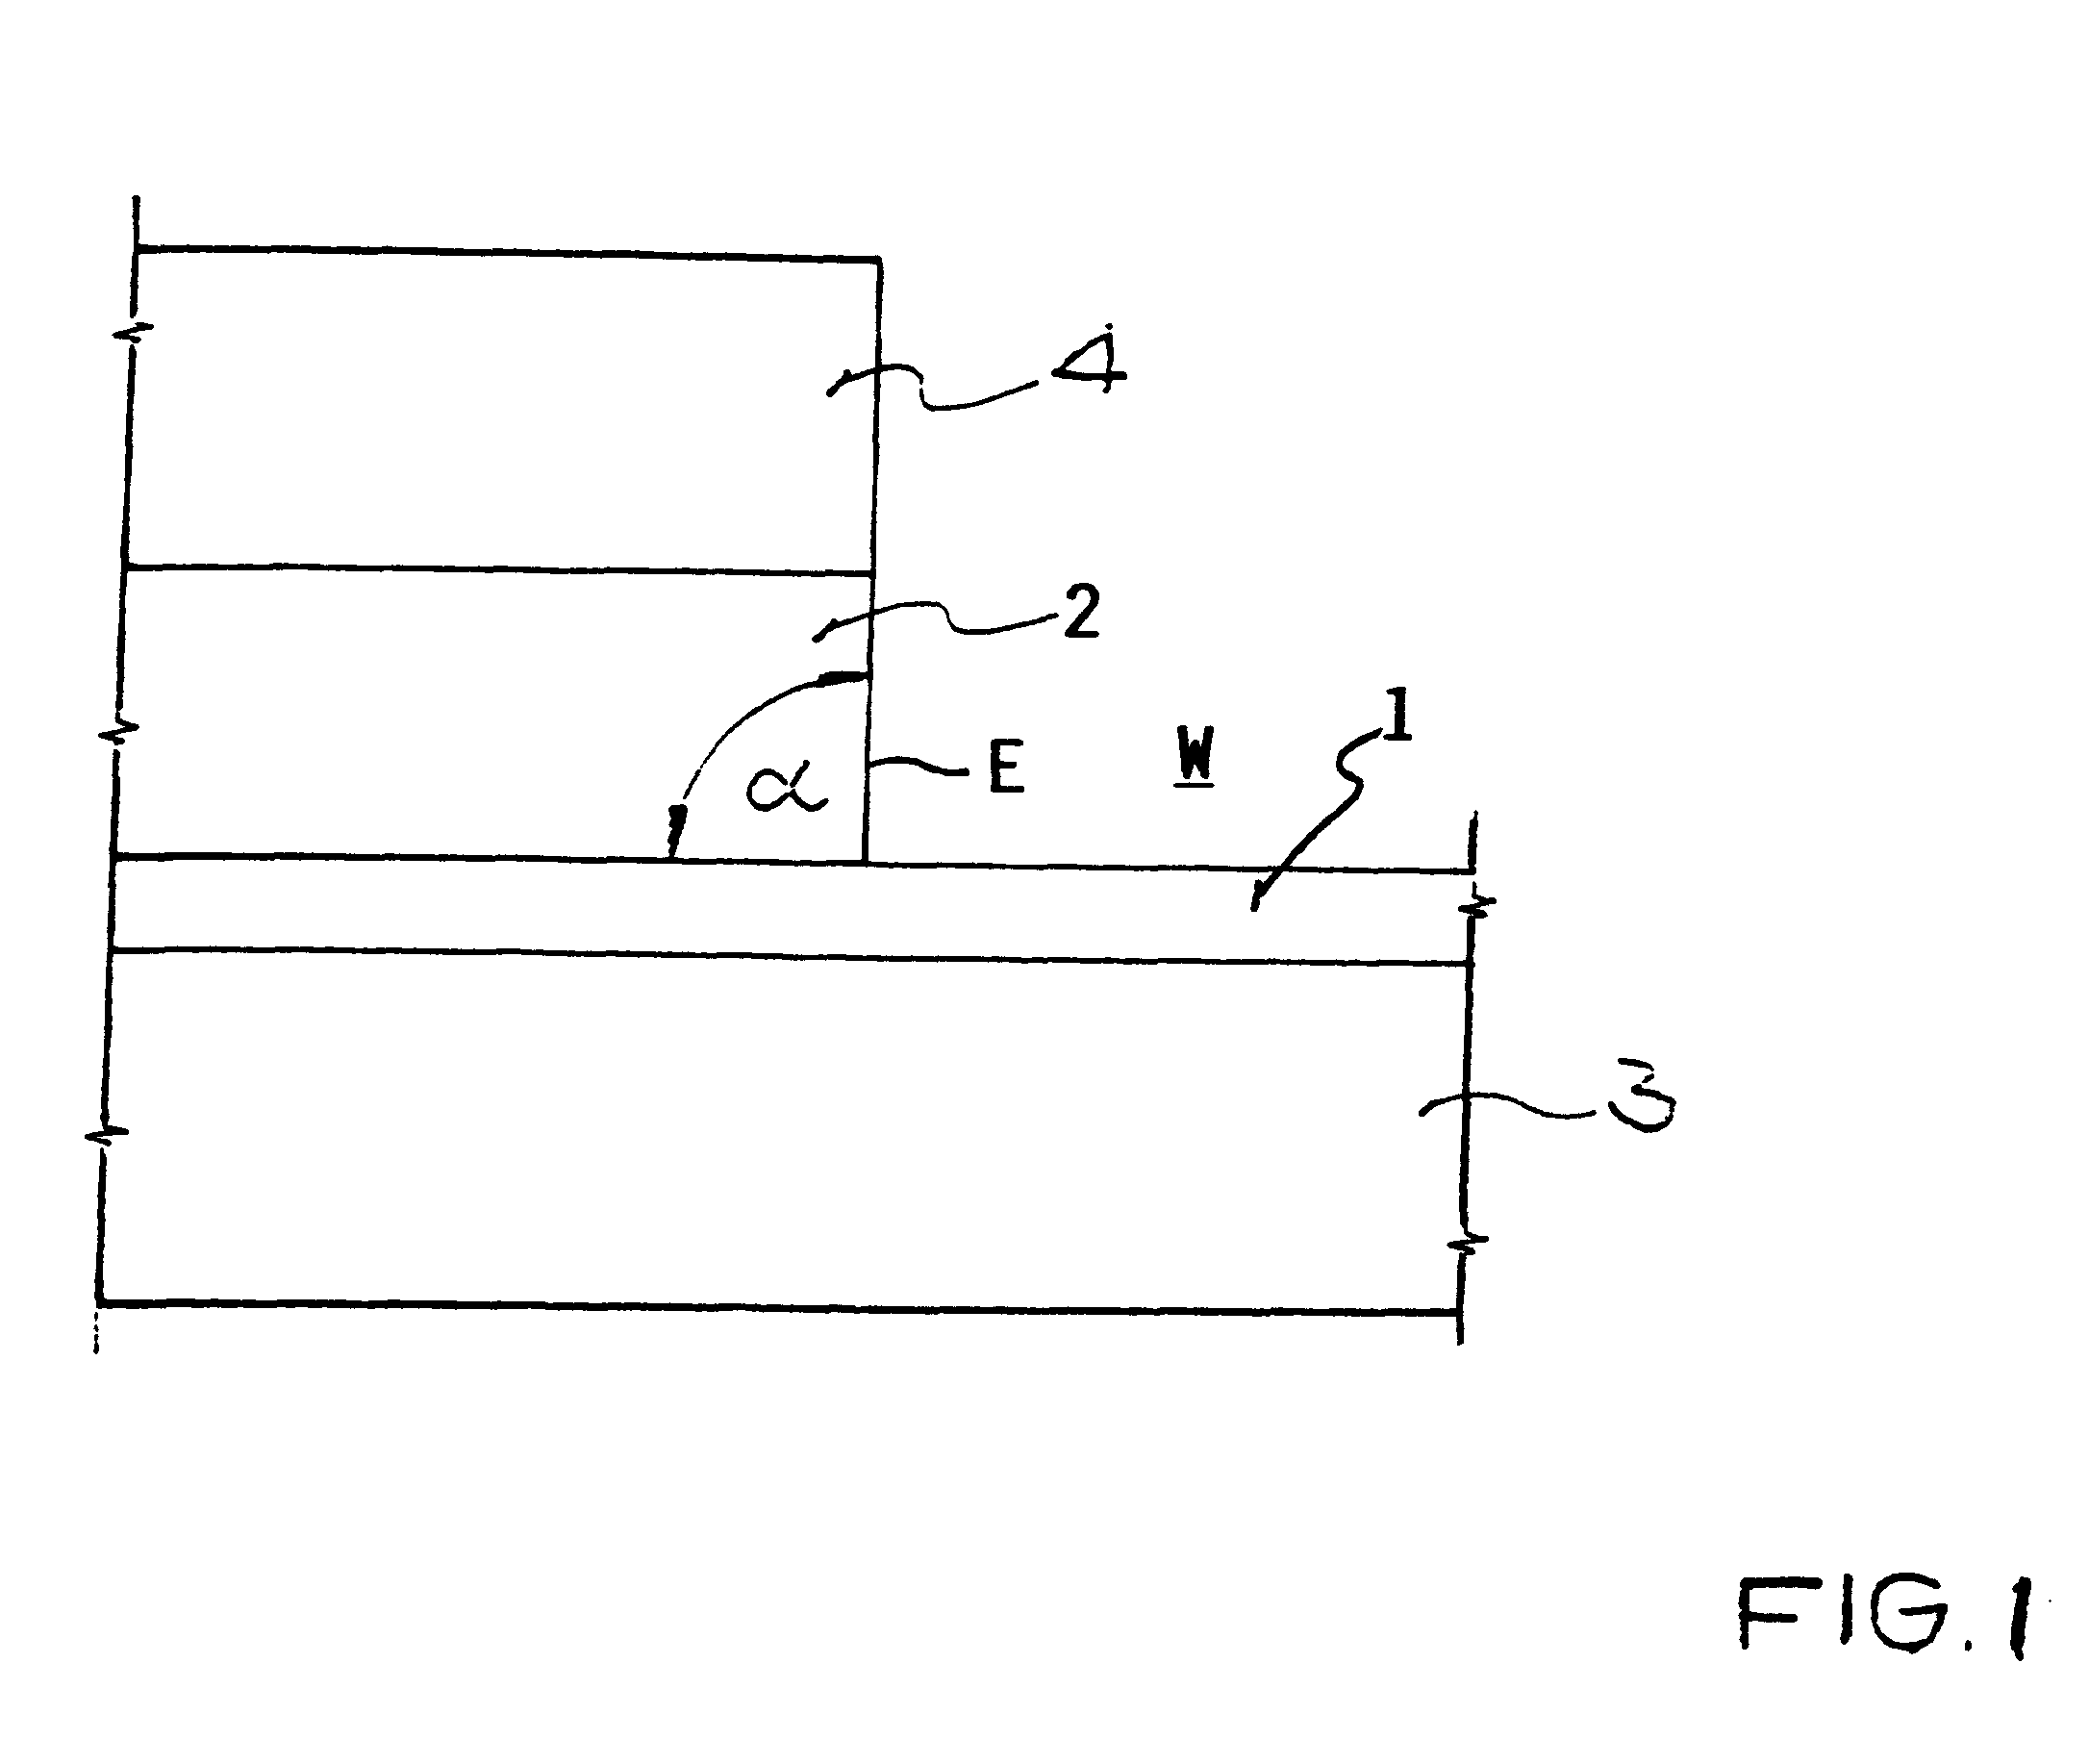 Method for anisotropic plasma-chemical dry etching of silicon nitride layers using a gas mixture containing fluorine